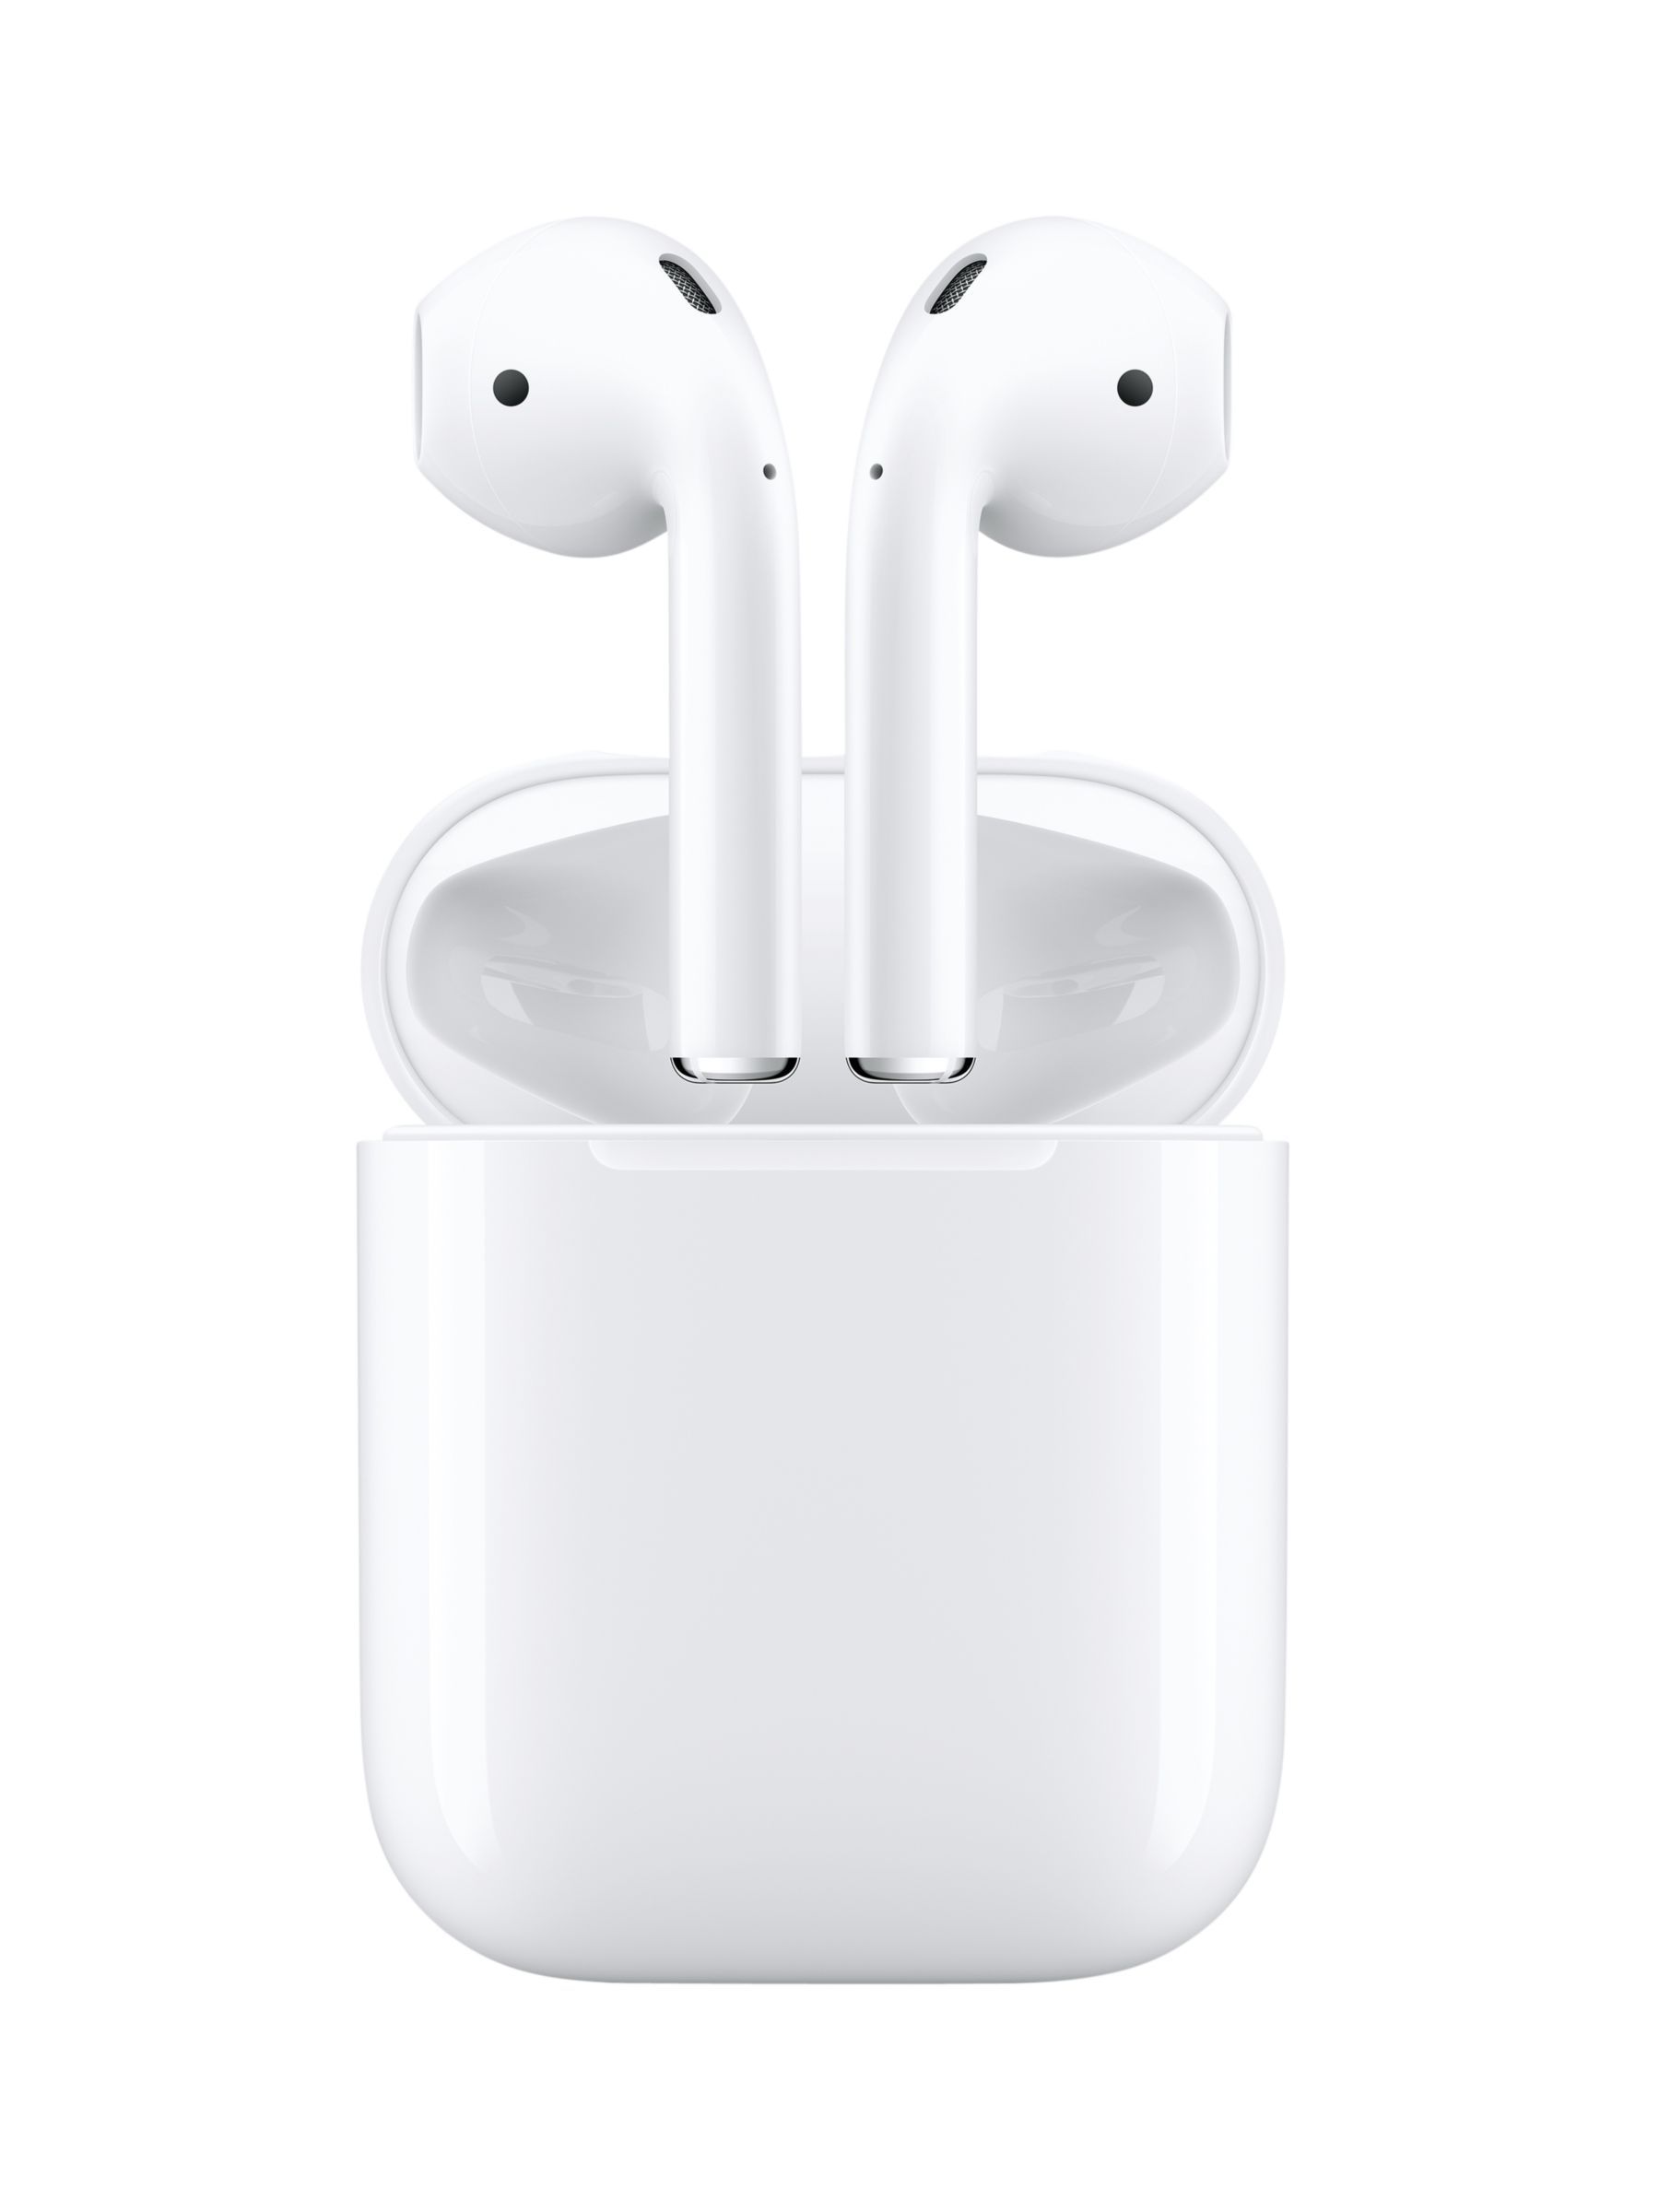 2019 Apple AirPods with Charging Case (2nd Generation) | John Lewis (UK)